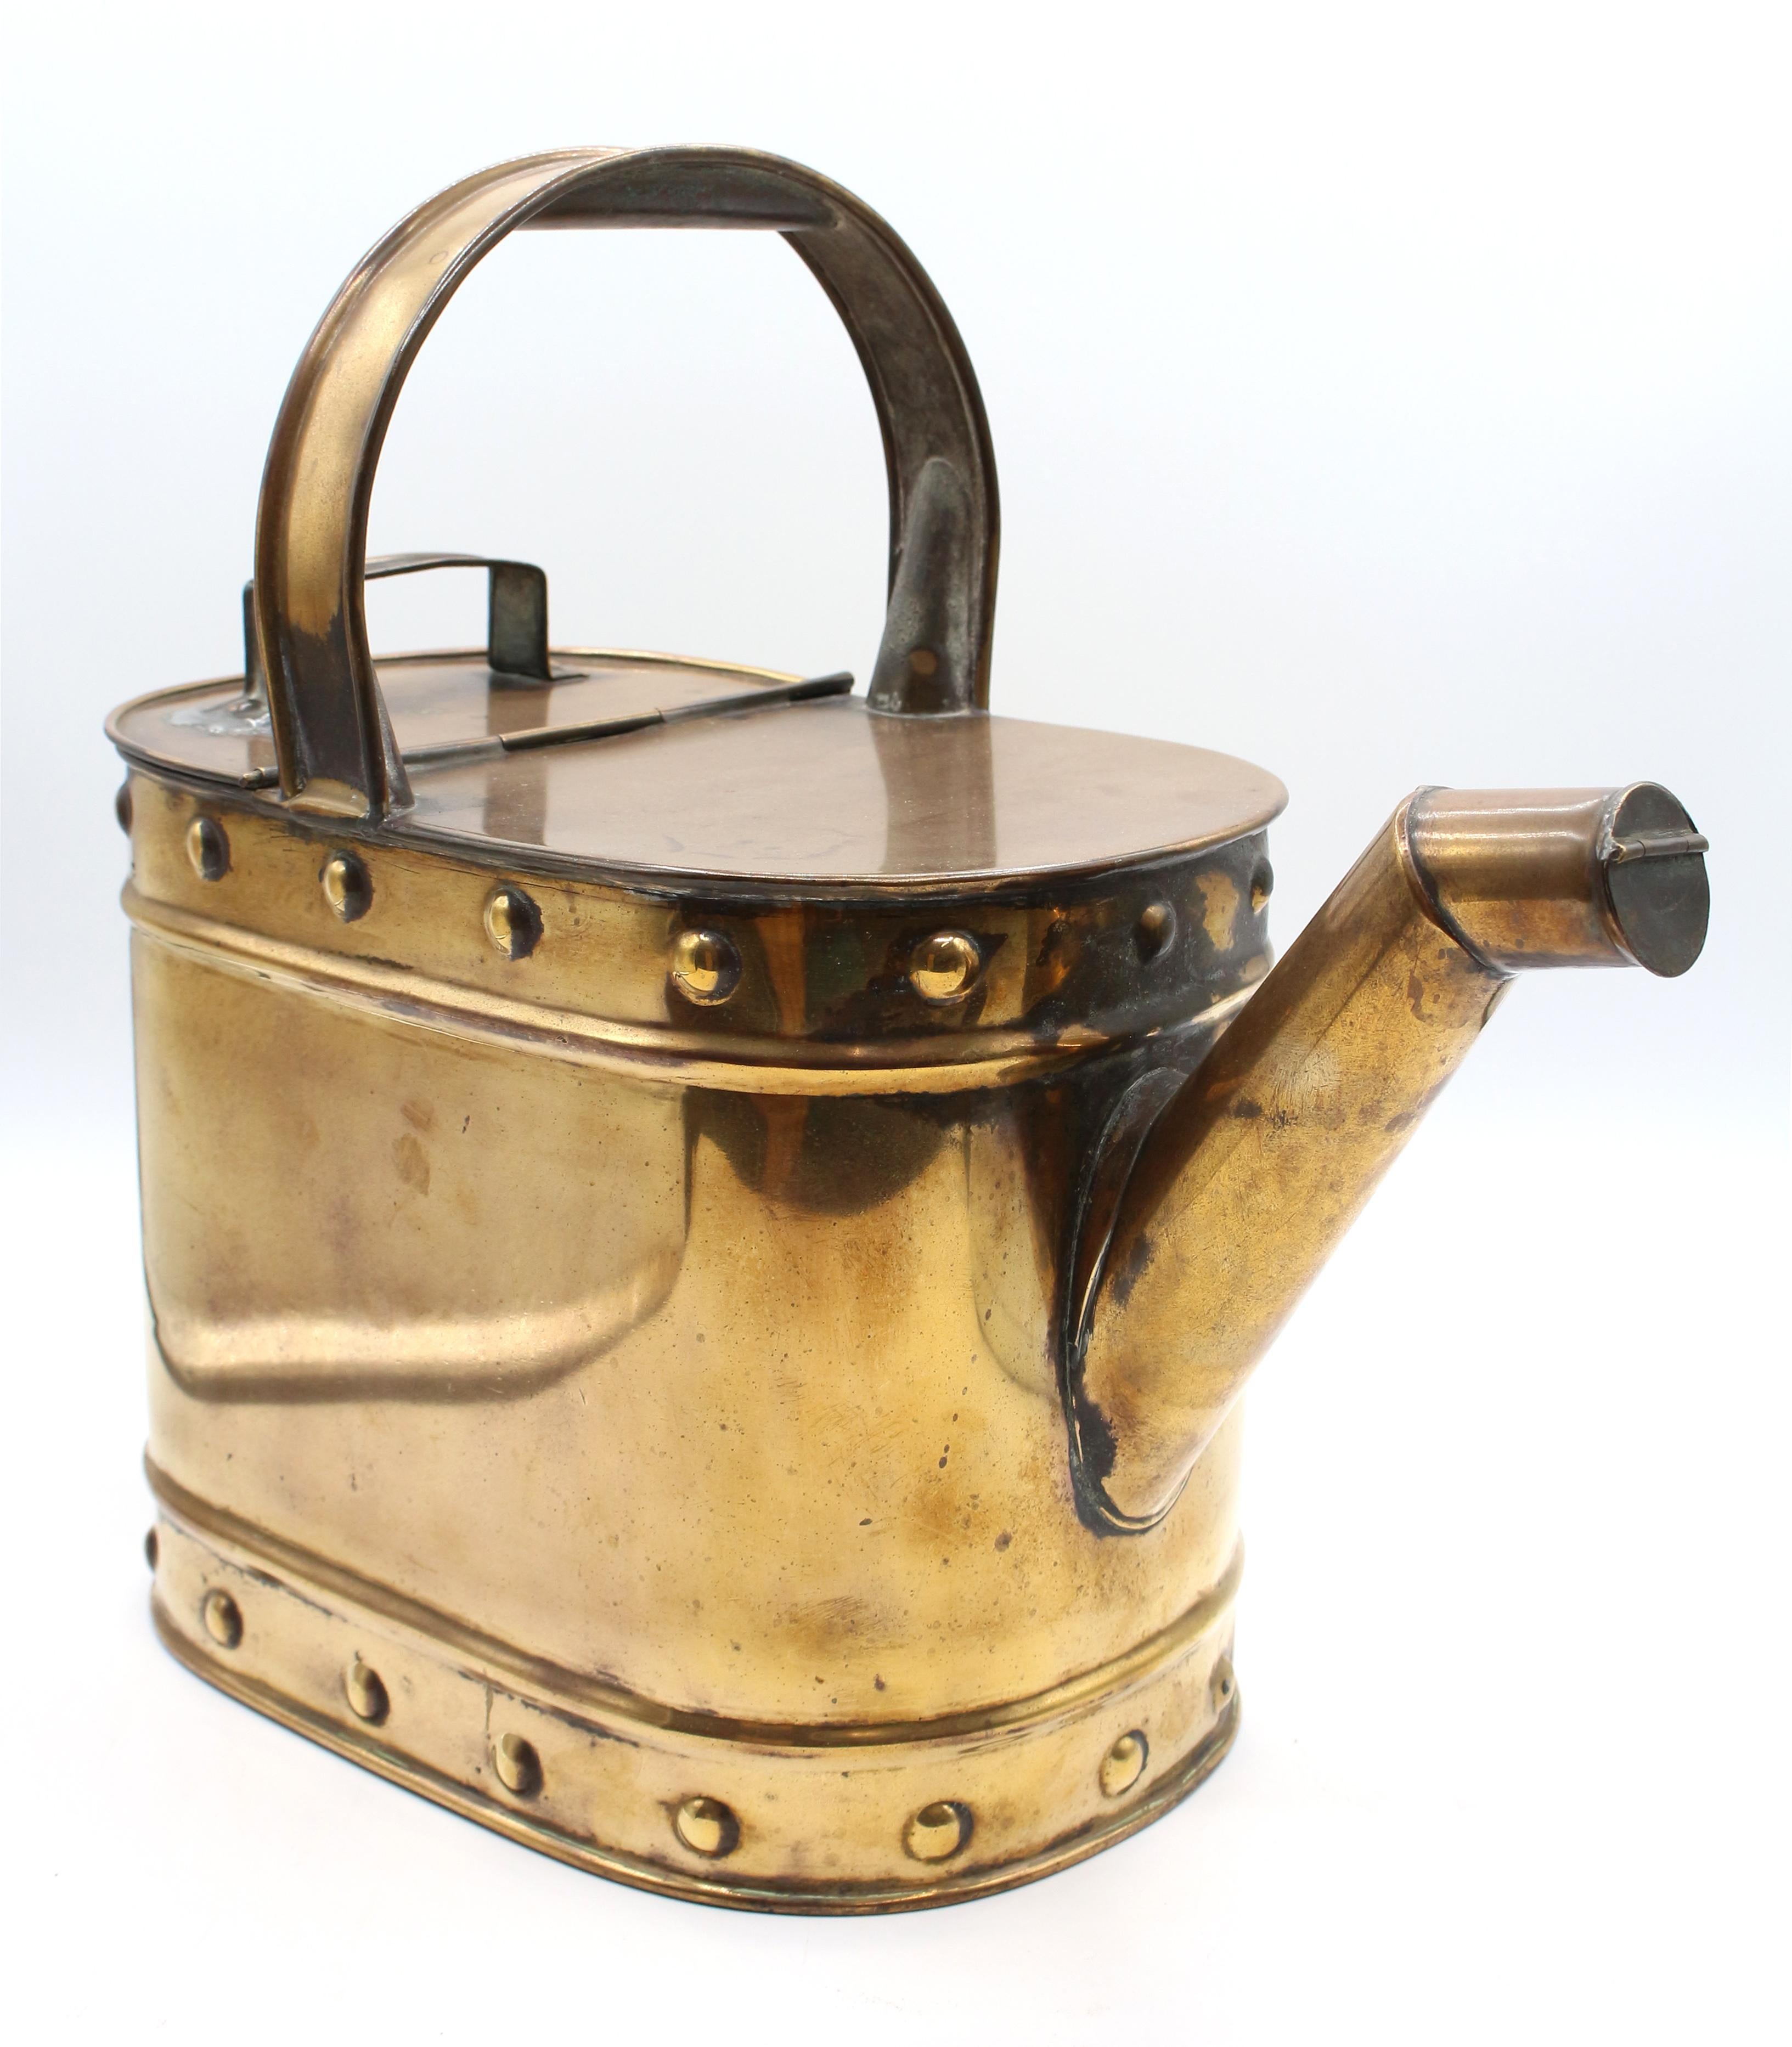 Circa 1880 brass watering can. Shaped handle. Bosses top & bottom border decoration. Old lid handle repair. Chinese export, mark on lid handle. Spout flip lid. A fine example. One pin tip size hole now filled, it does hold water. 15.25